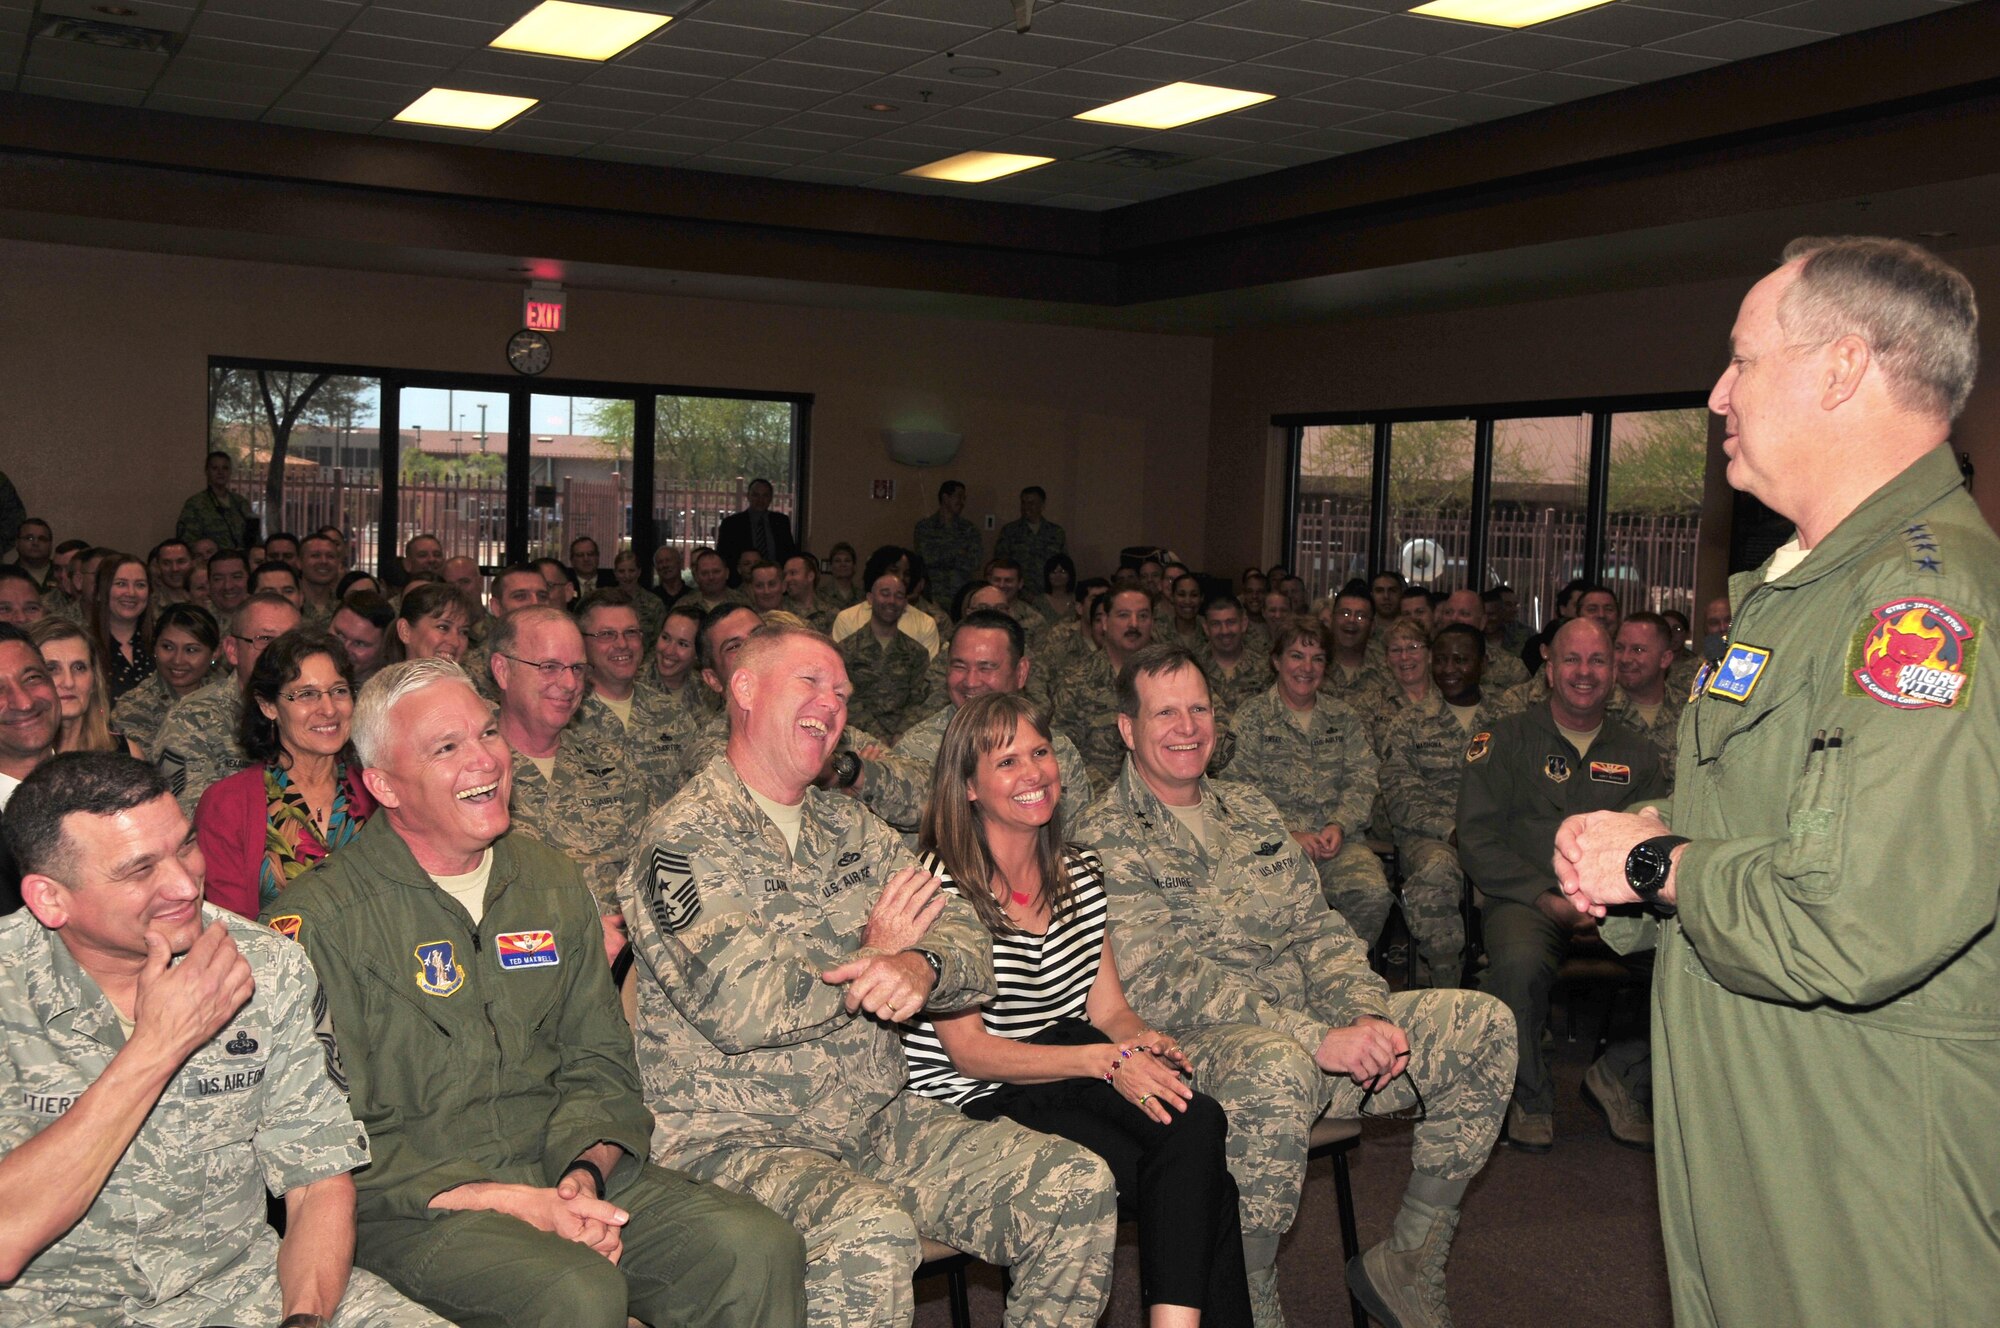 Air Force Chief of Staff Gen. Mark A. Welsh III addresses Airmen of the 161st Air Refueling Wing, during a town hall meeting March 22, 2015, at Phoenix Sky Harbor Air National Guard Base, Ariz. During the visit, Welsh interacted with Airmen and their spouses at an officer’s call and mission brief. The chief of staff got a first-hand look at the KC-135 Stratotanker unit and the Airmen who make the refueling mission a success. (U.S. Air National Guard photo/Tech. Sgt. Courtney Enos)